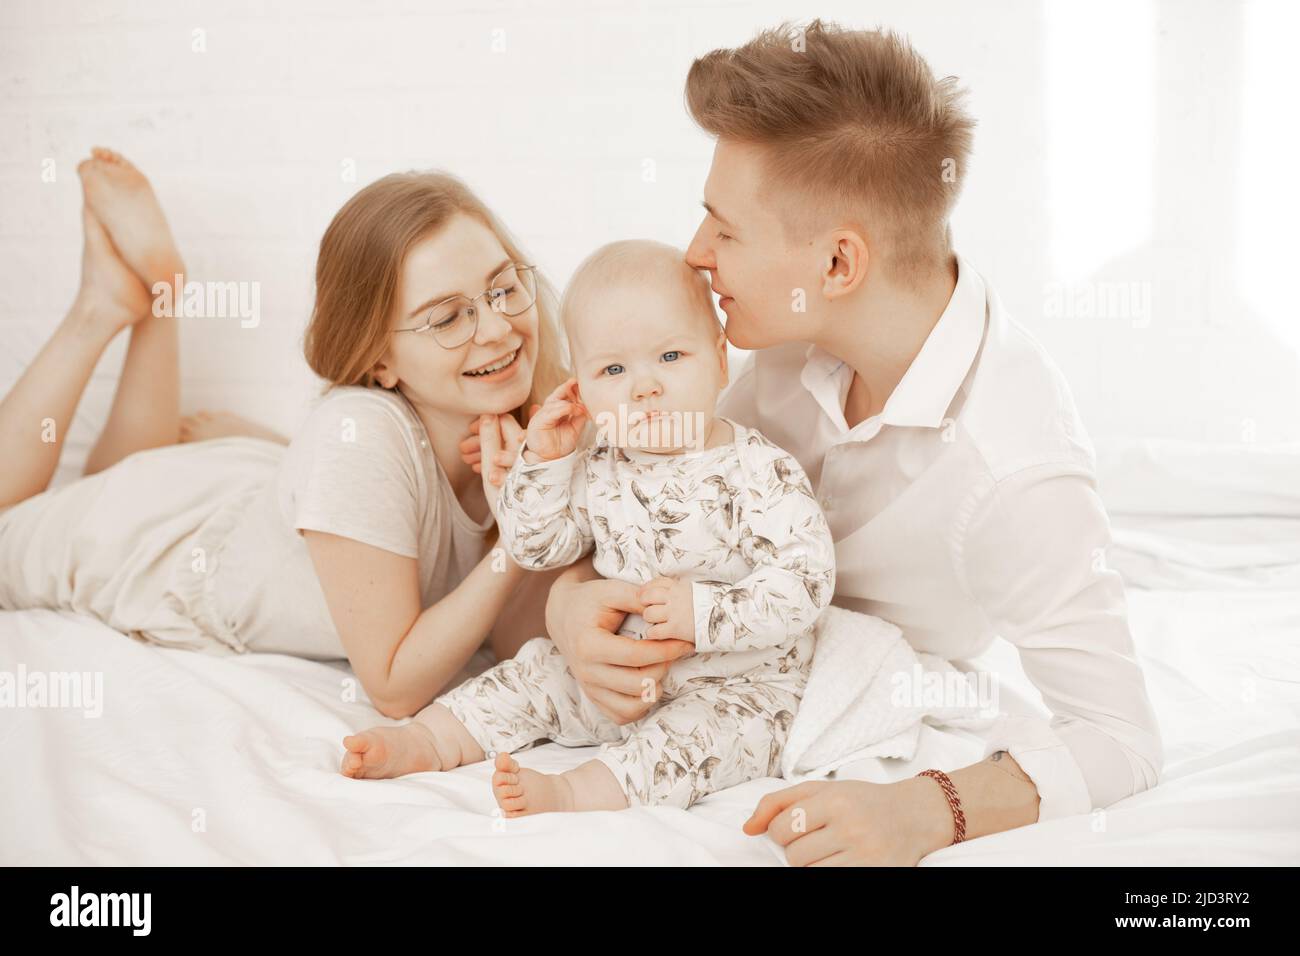 Young mother and father lay with little baby on bed, embrace and enjoy on white background. Cute relationship between parents and infant child, free Stock Photo